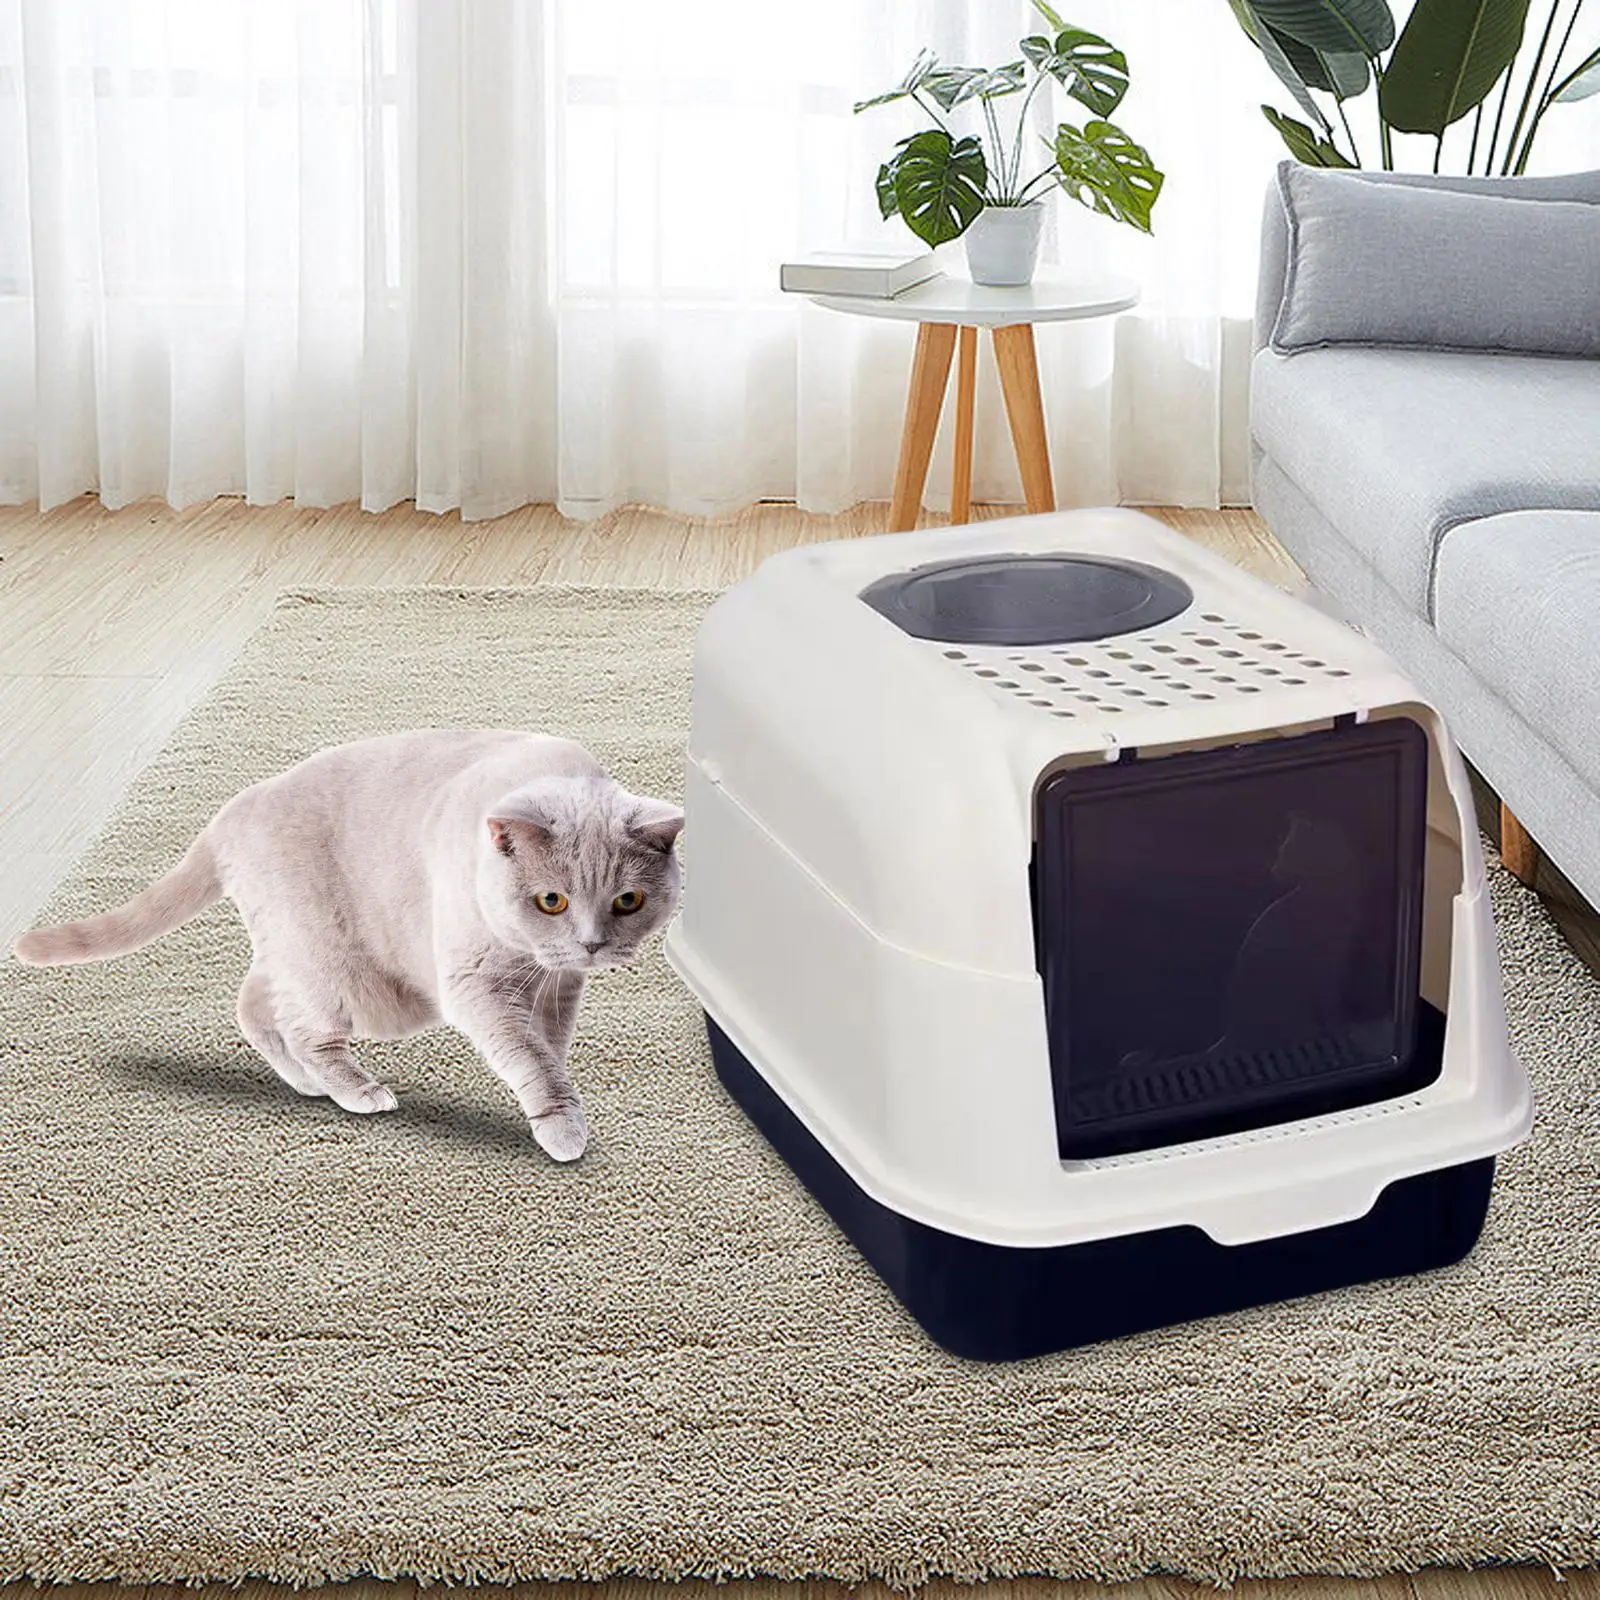 Enclosed Cat Litter Box Kitten Litter Box Covered Cat Litter Tray Easy to Clean for Travel